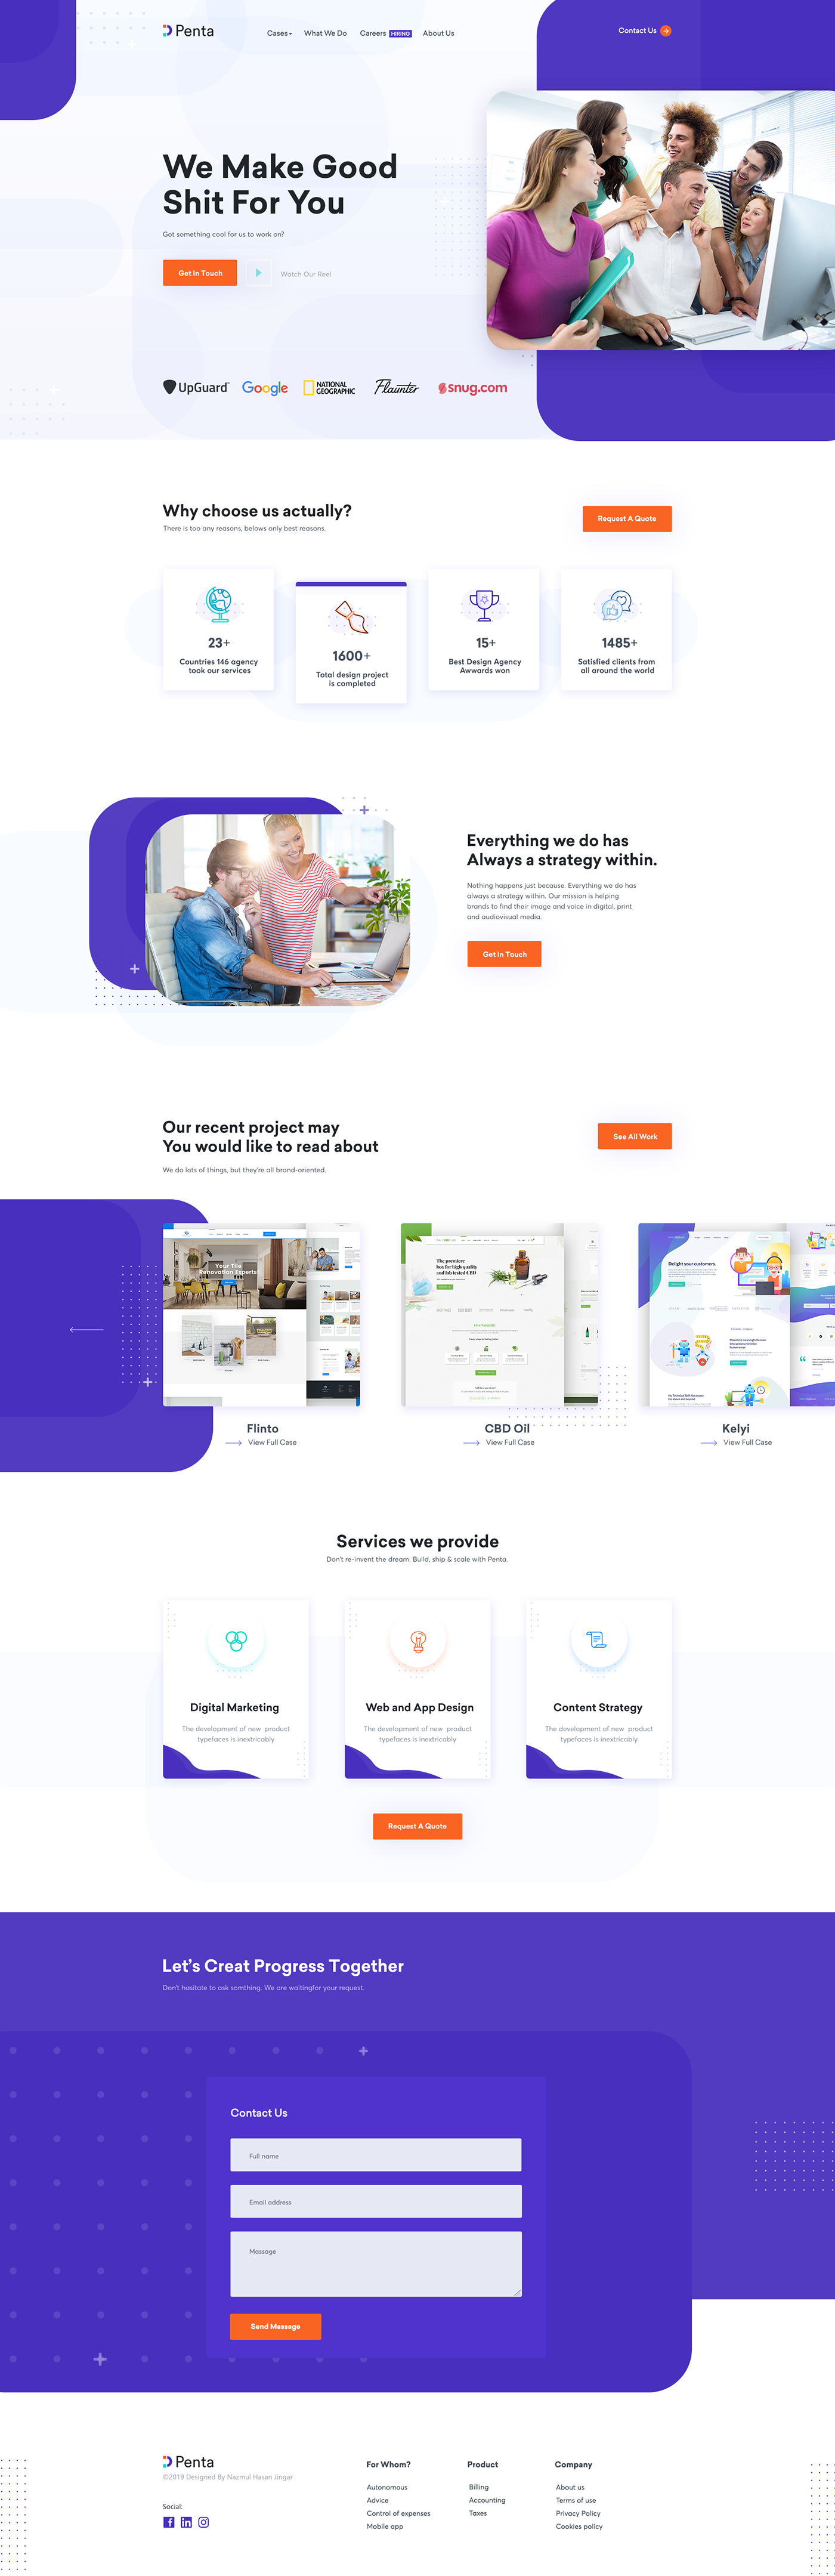 agency Tags Icon help circle 2019 trend app design × clean UI design landing page × design startup agency startup agency design